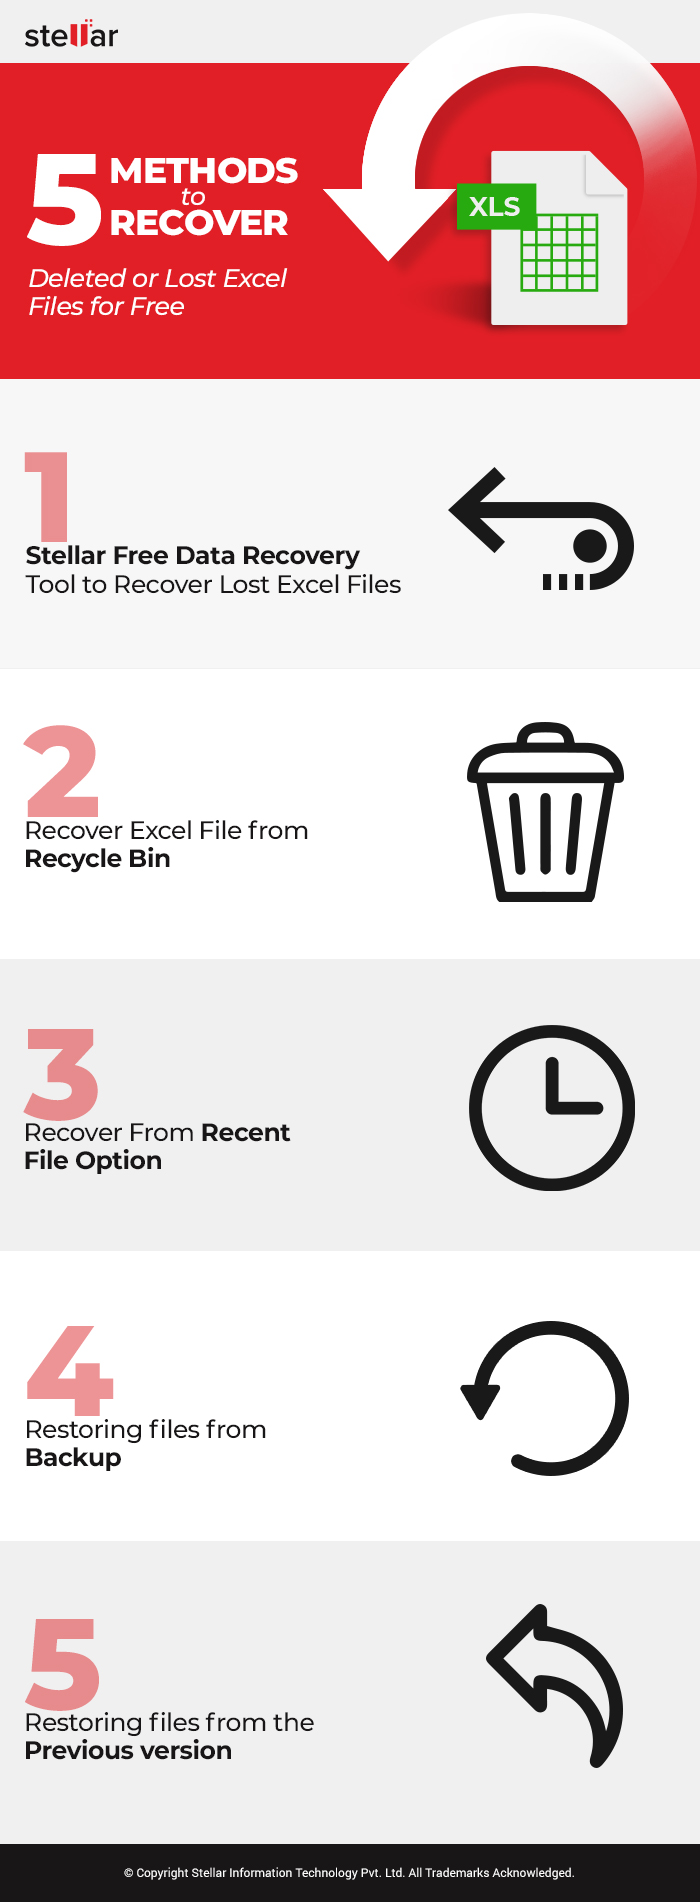 5 methods to recover deleted excel files for free | Infographic | Image